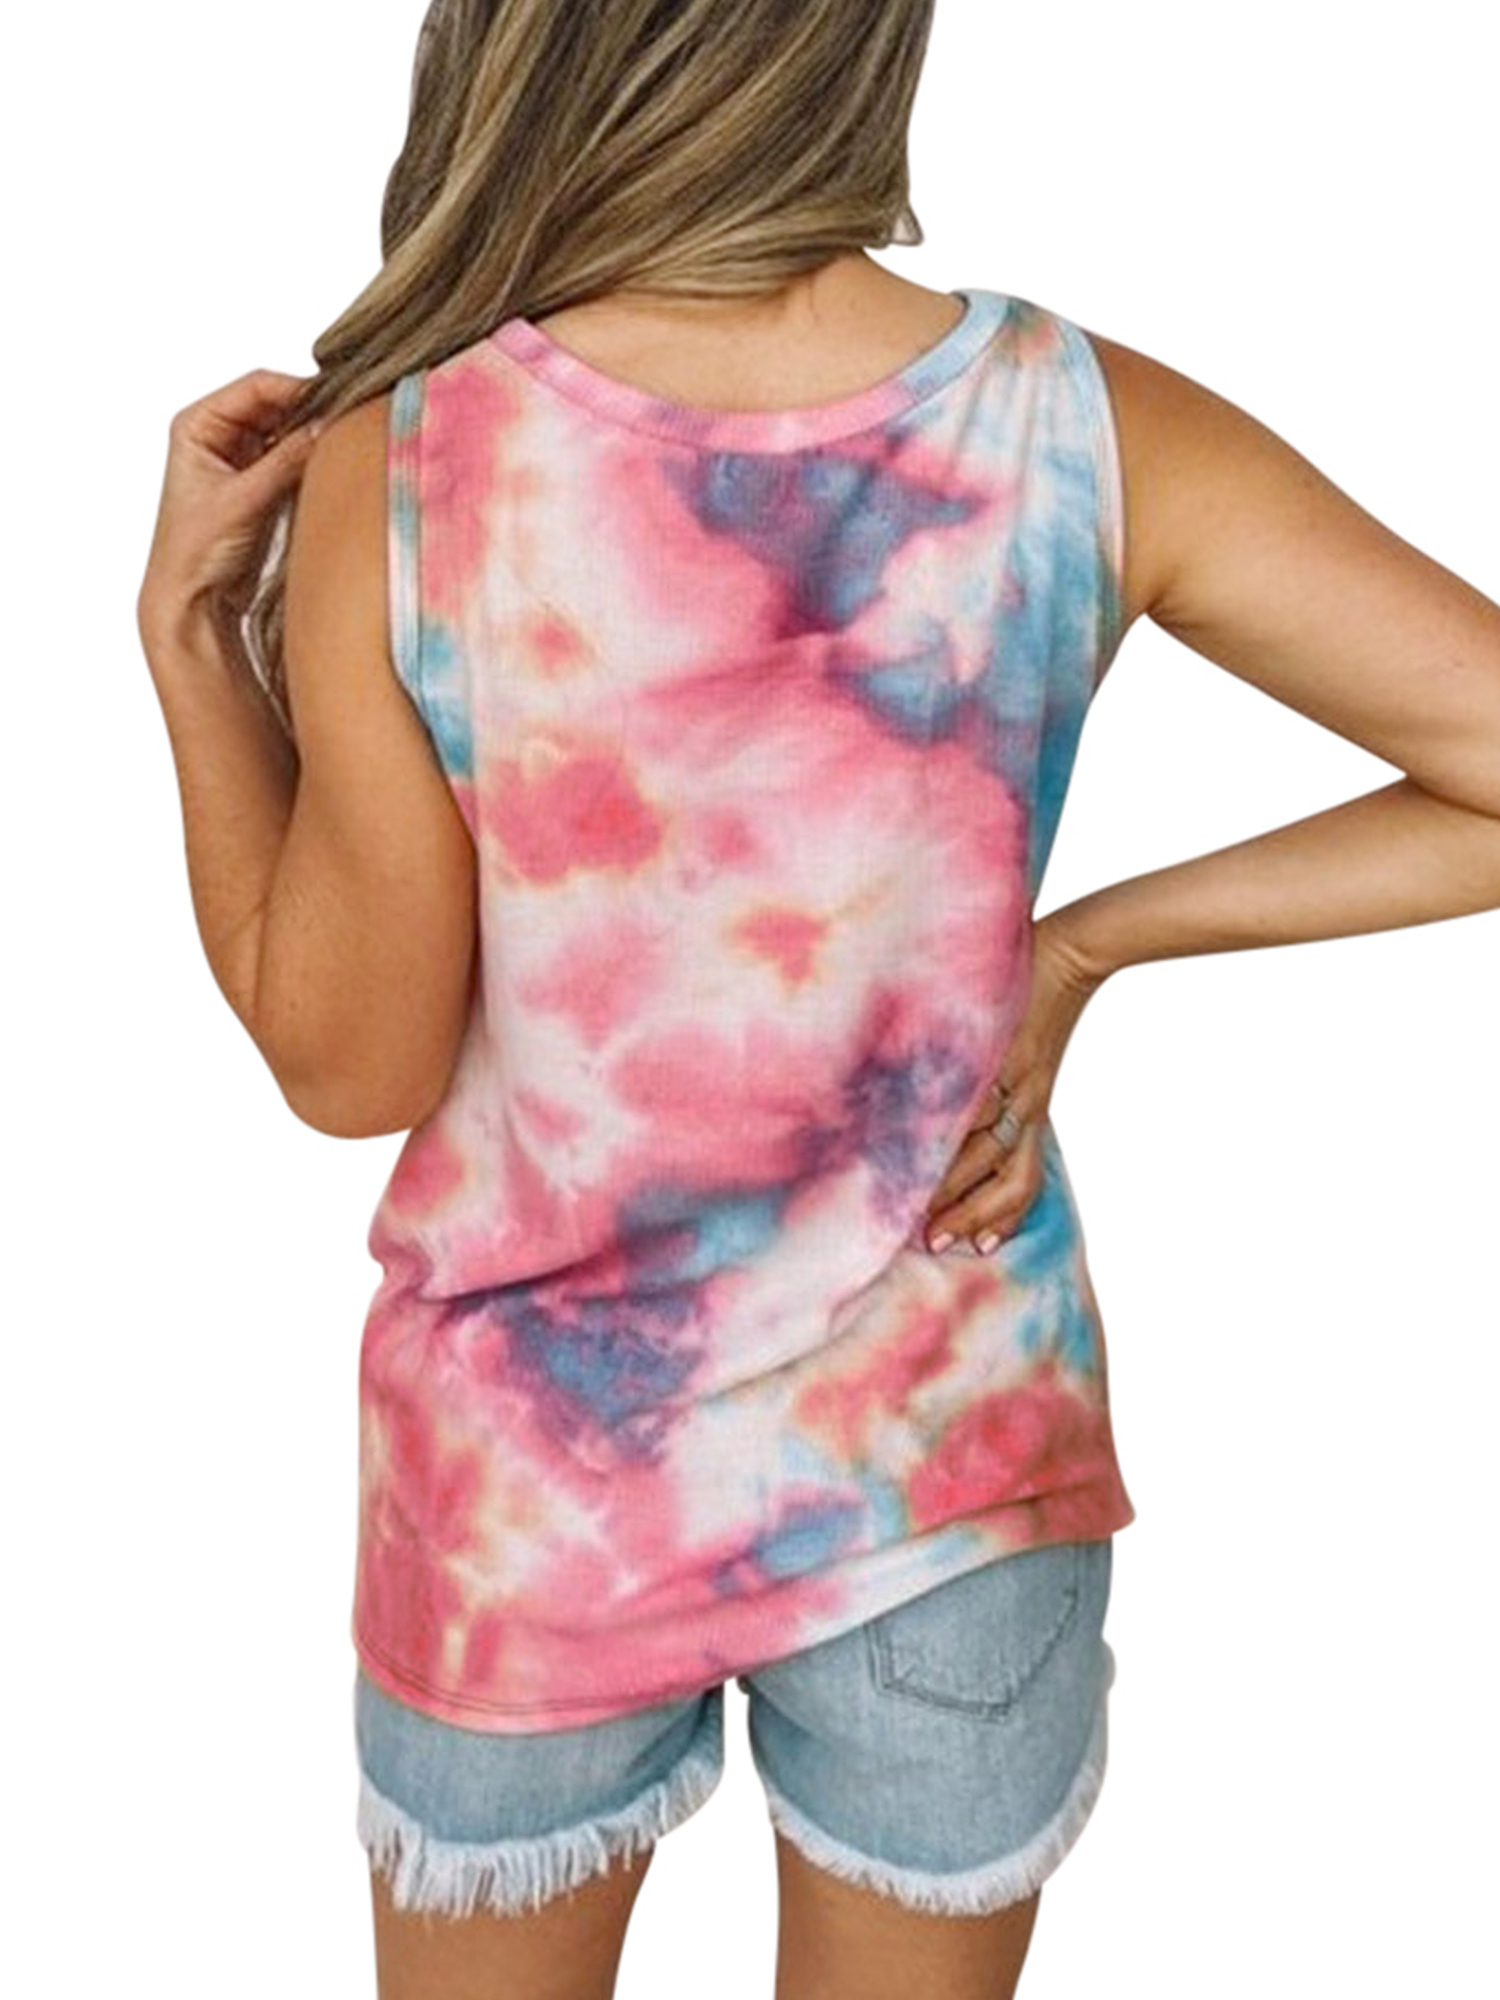 Plus Size Tank Top for Women Fashion Sleeveless Round Neck Tie Dye Tops Casual Summer Gradient Color Vest T Shirt 5XL - image 3 of 3